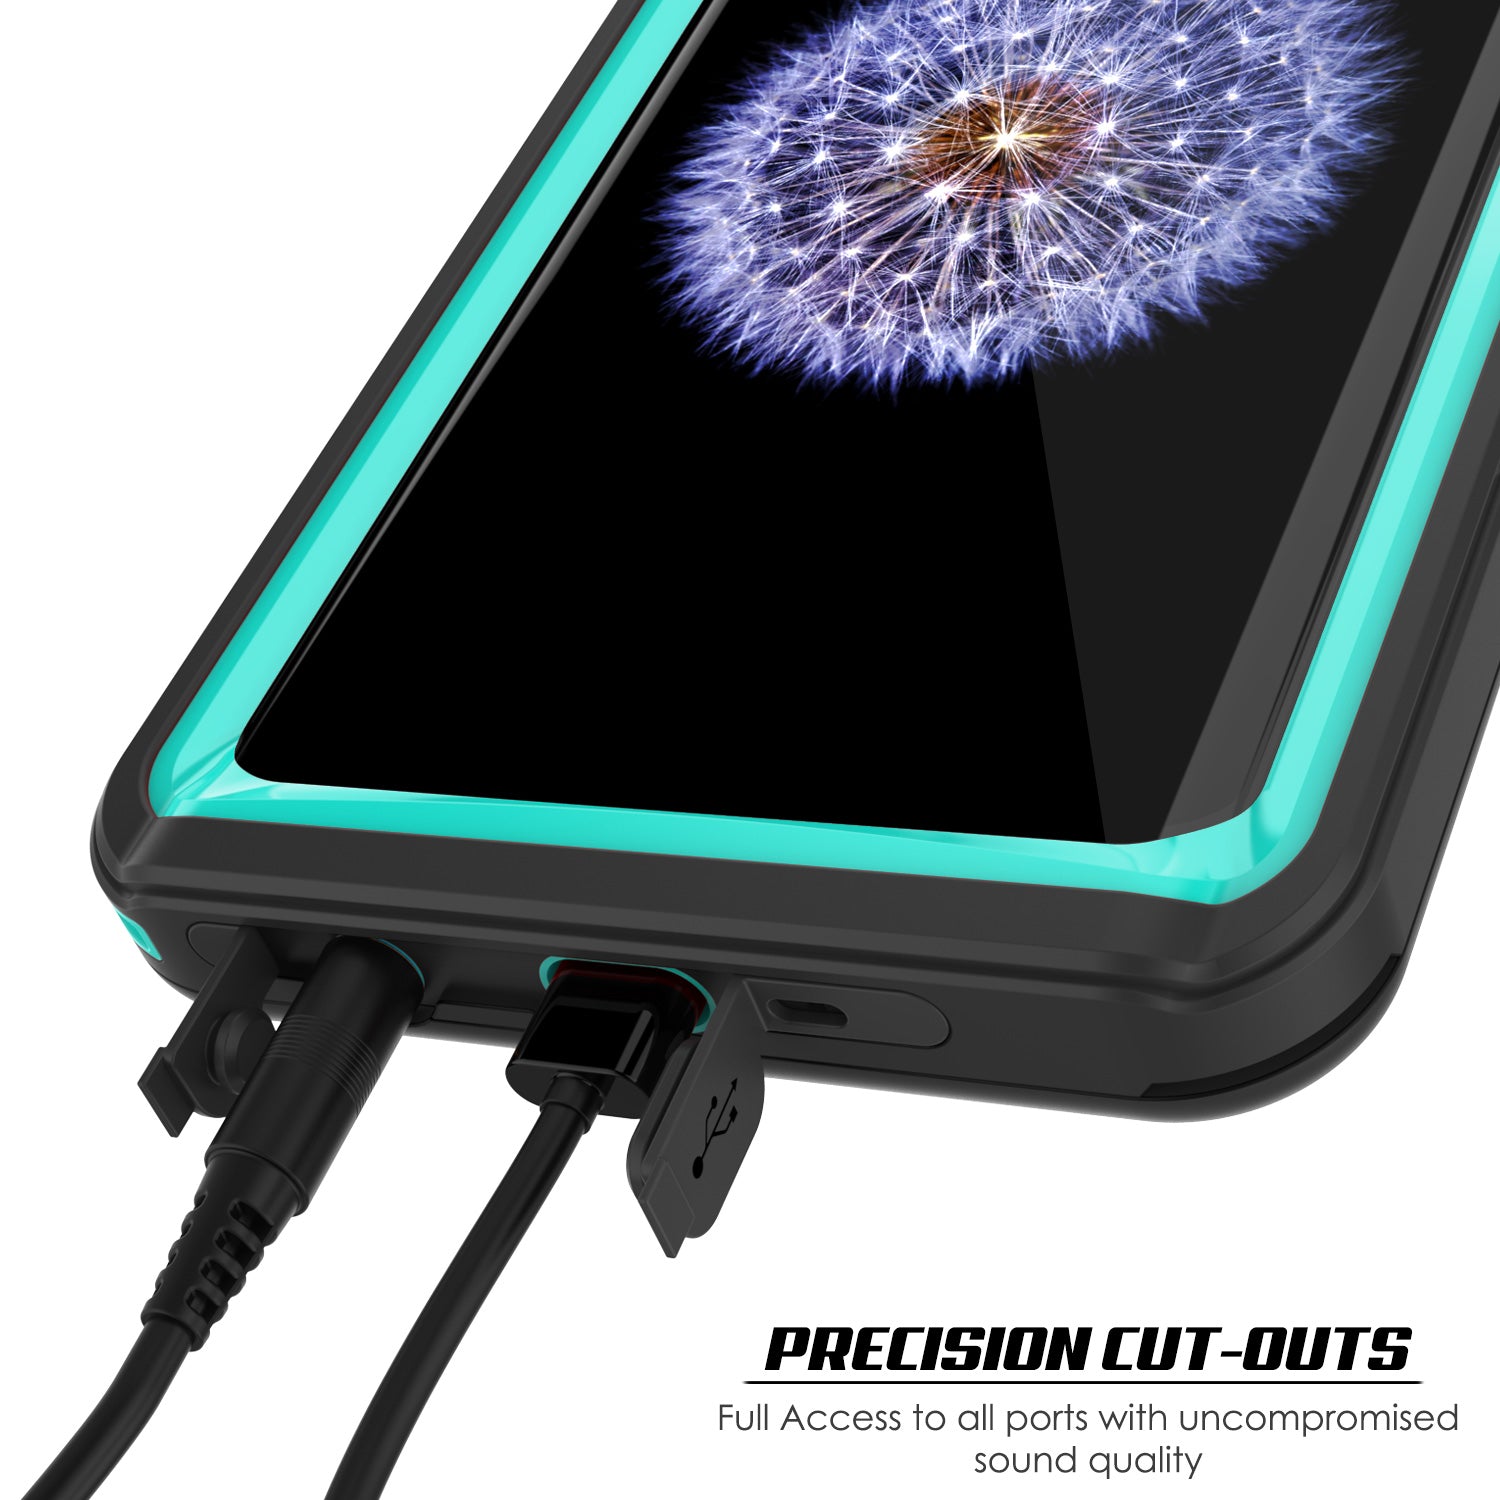 Punkcase Galaxy S9 Extreme Series Waterproof Body | Teal